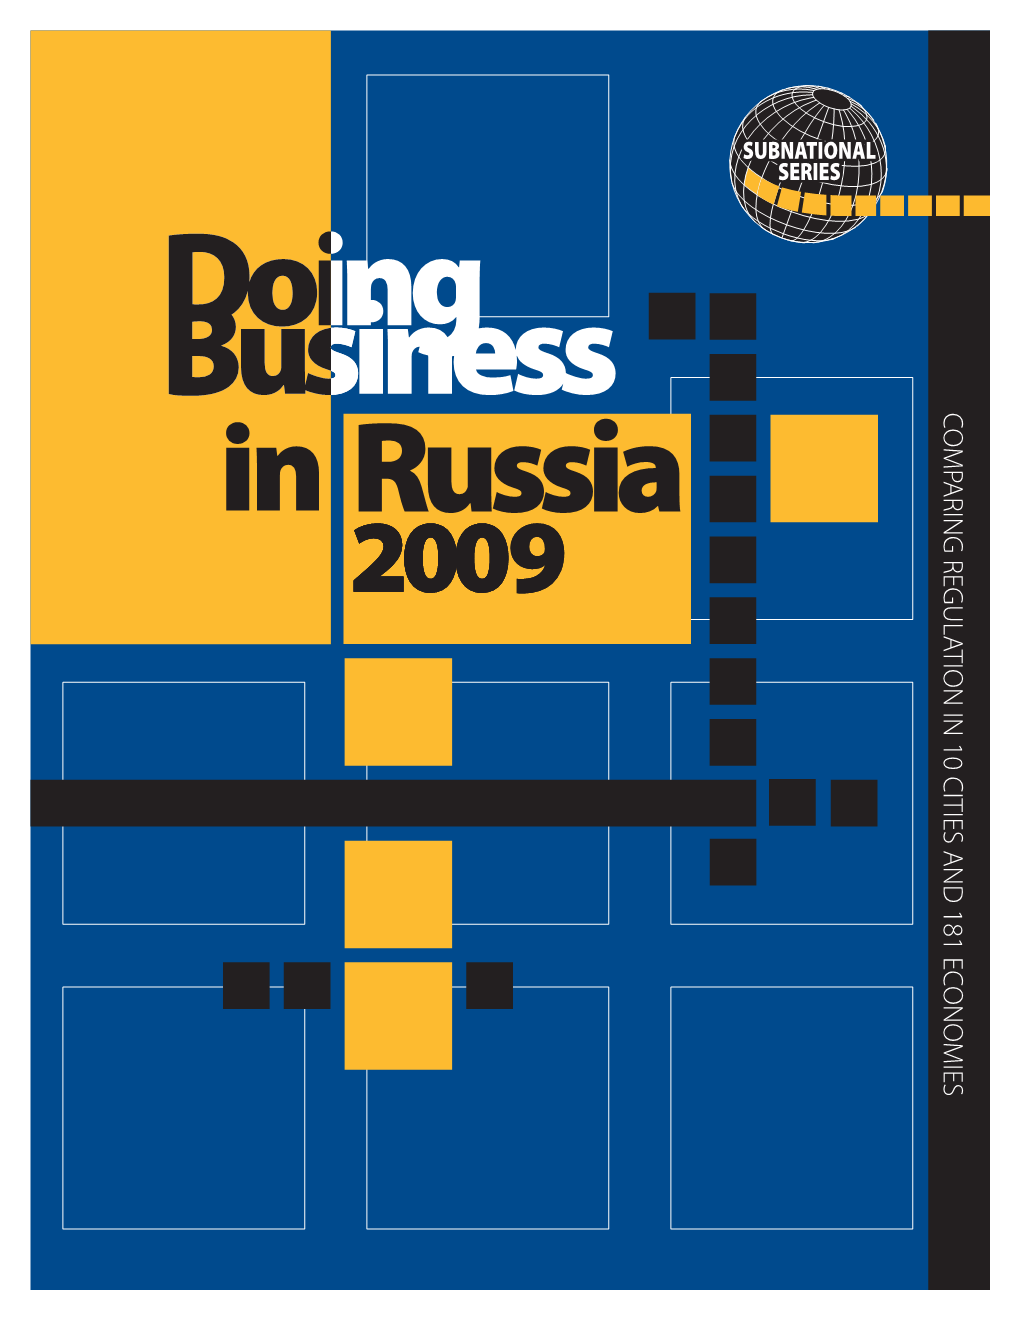 Doing Business in Russia 2009 and Other Subnational and Regional Doing Business Studies Can Be Downloaded at No Charge At